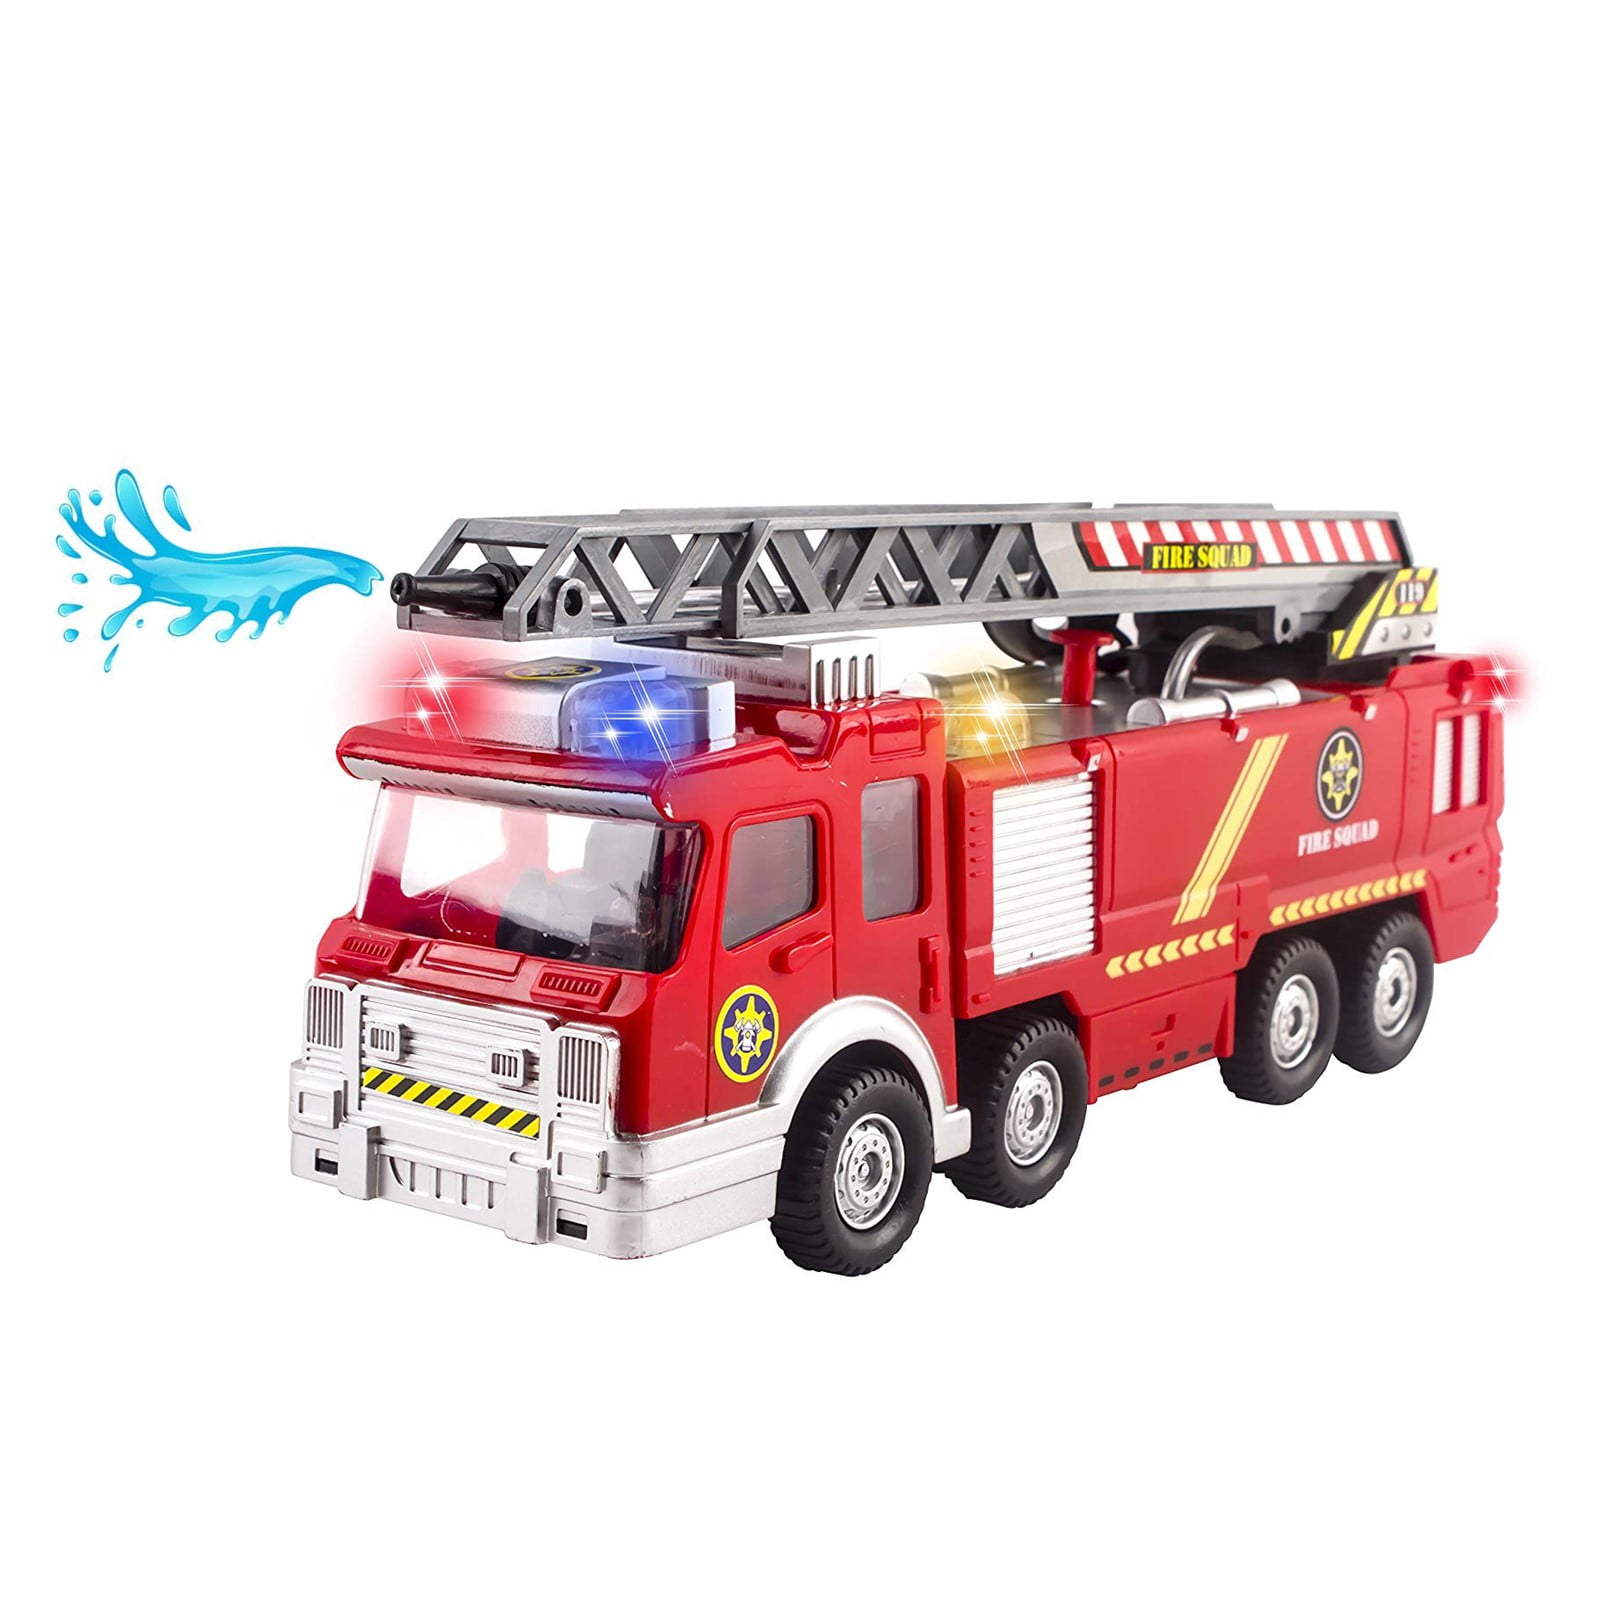 FIRE ENGINE VEHICLE  3D AND 4 2D CARS edible cake topper decorations set 